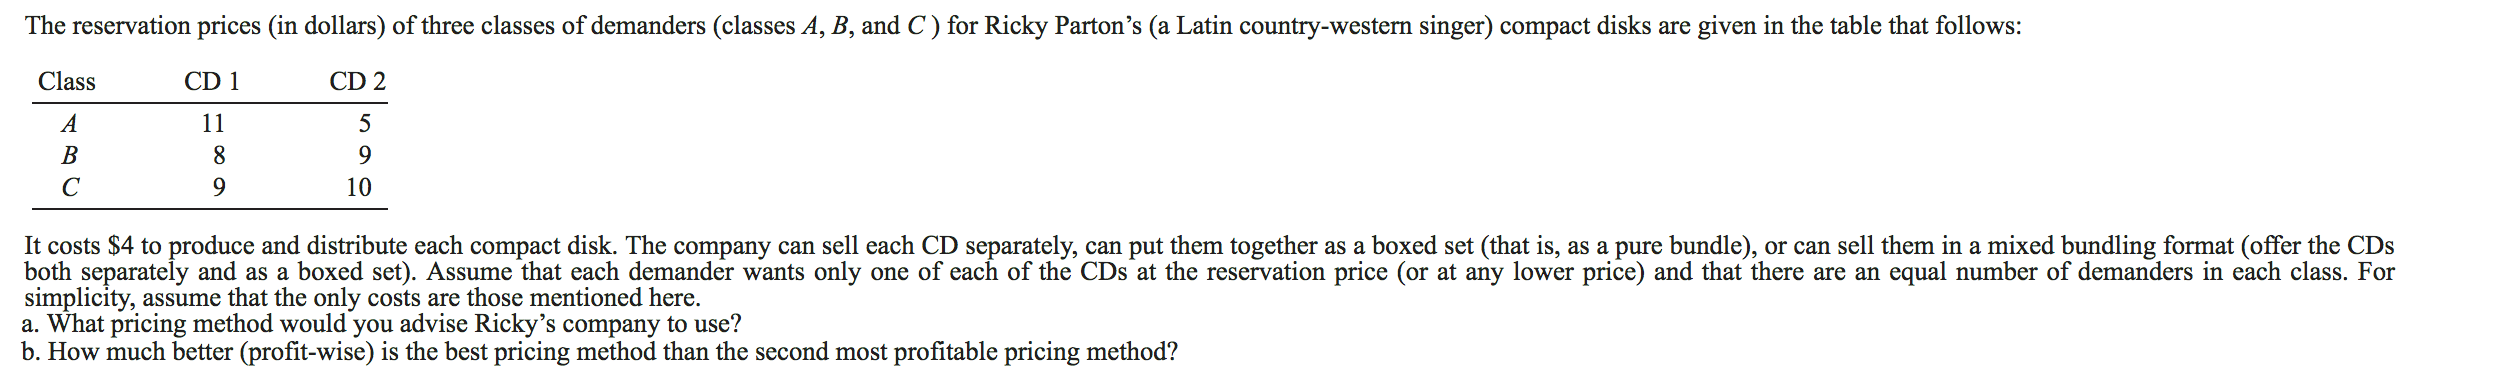 The reservation prices (in dollars) of three classes of demanders (classes A, B, and C) for Ricky Parton's (a Latin country-western singer) compact disks are given in the table that follows:
Class
CD 1
CD 2
А
11
5
В
С
10
It costs $4 to produce and distribute each compact disk. The company can sell each CD separately, can put them together as a boxed set (that is, as a pure bundle), or can sell them in a mixed bundling format (offer the CDs
both separately and as a boxed set). Assume that each demander wants only one of each of the CDs at the reservation price (or at any lower price) and that there are an equal number of demanders in each class. For
simplicity, assume that the only costs are those mentioned here
a. What pricing method would you advise Ricky's company to use?
b. How much better (profit-wise) is the best pricing method than the second most profitable pricing method?
